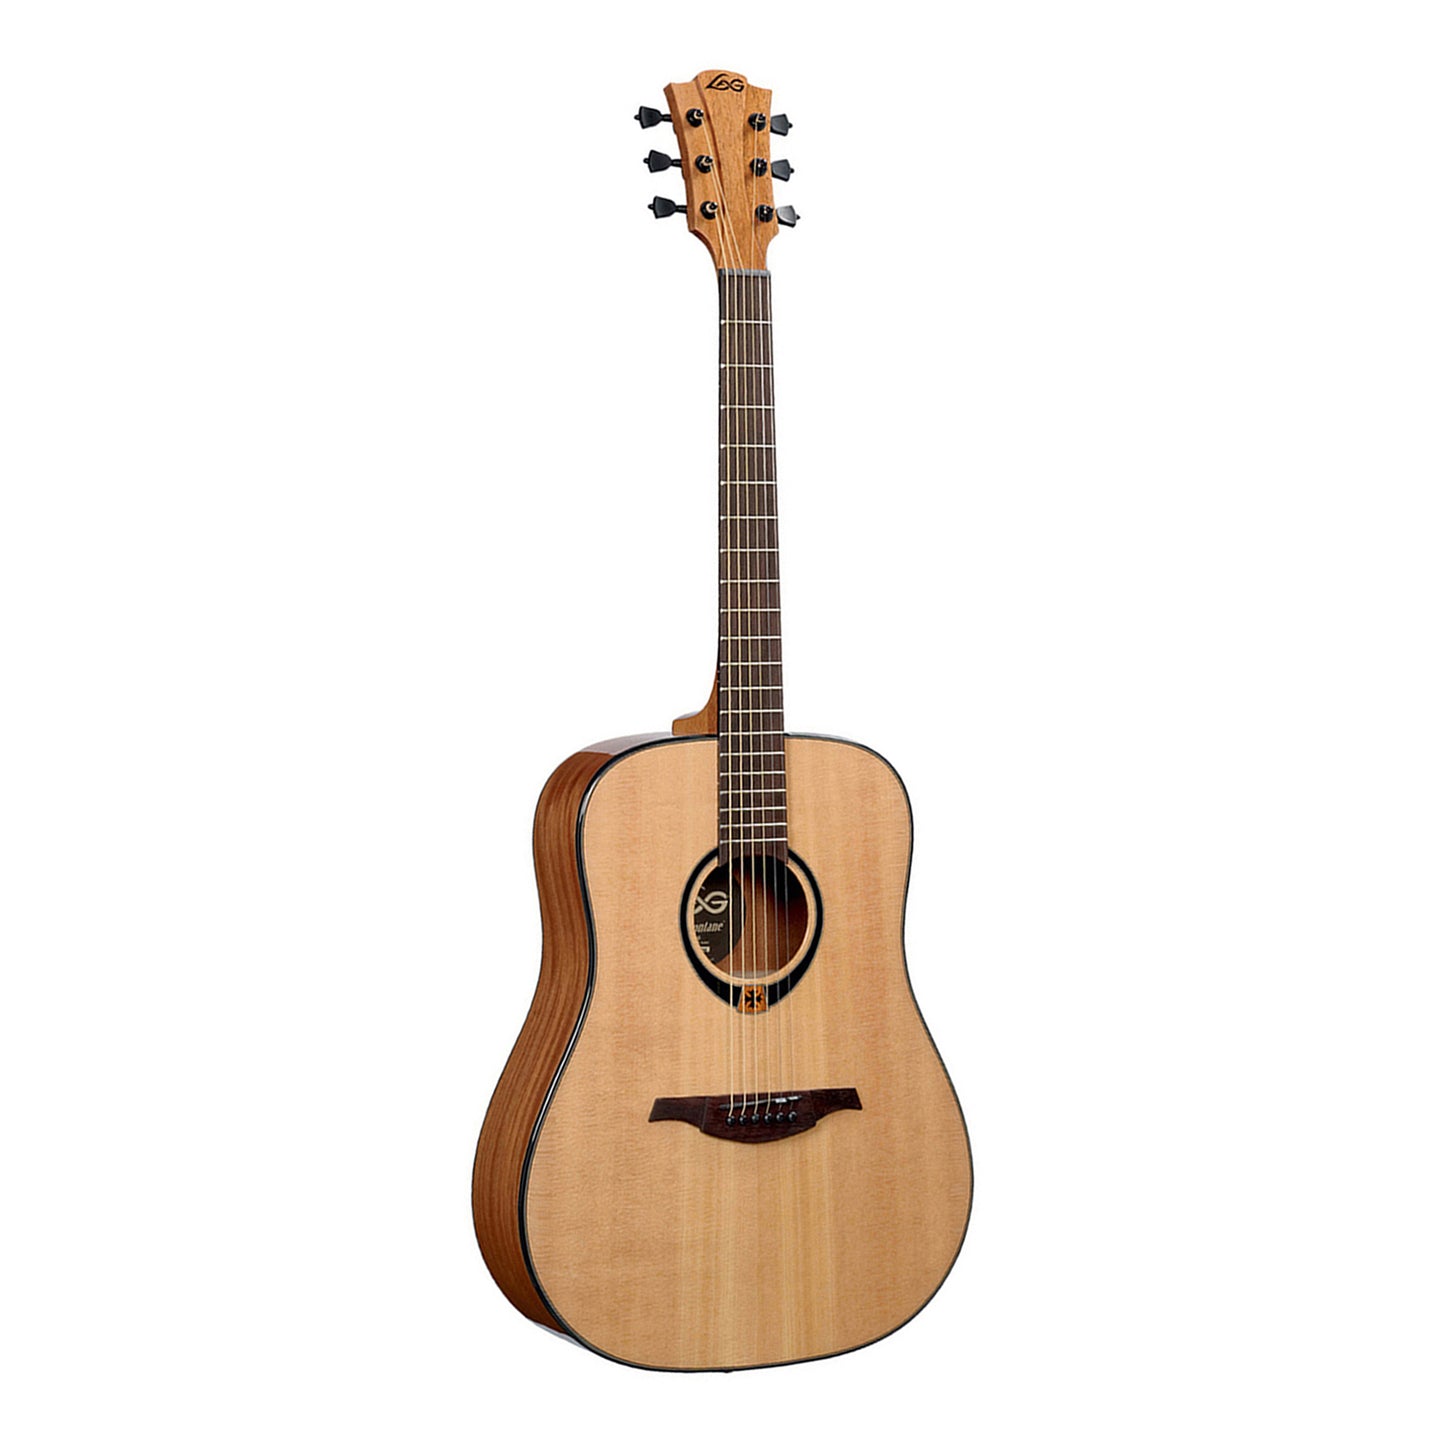 Lag T80d Tramontane Dreadnought Solid Spruce Top Natural Guitar